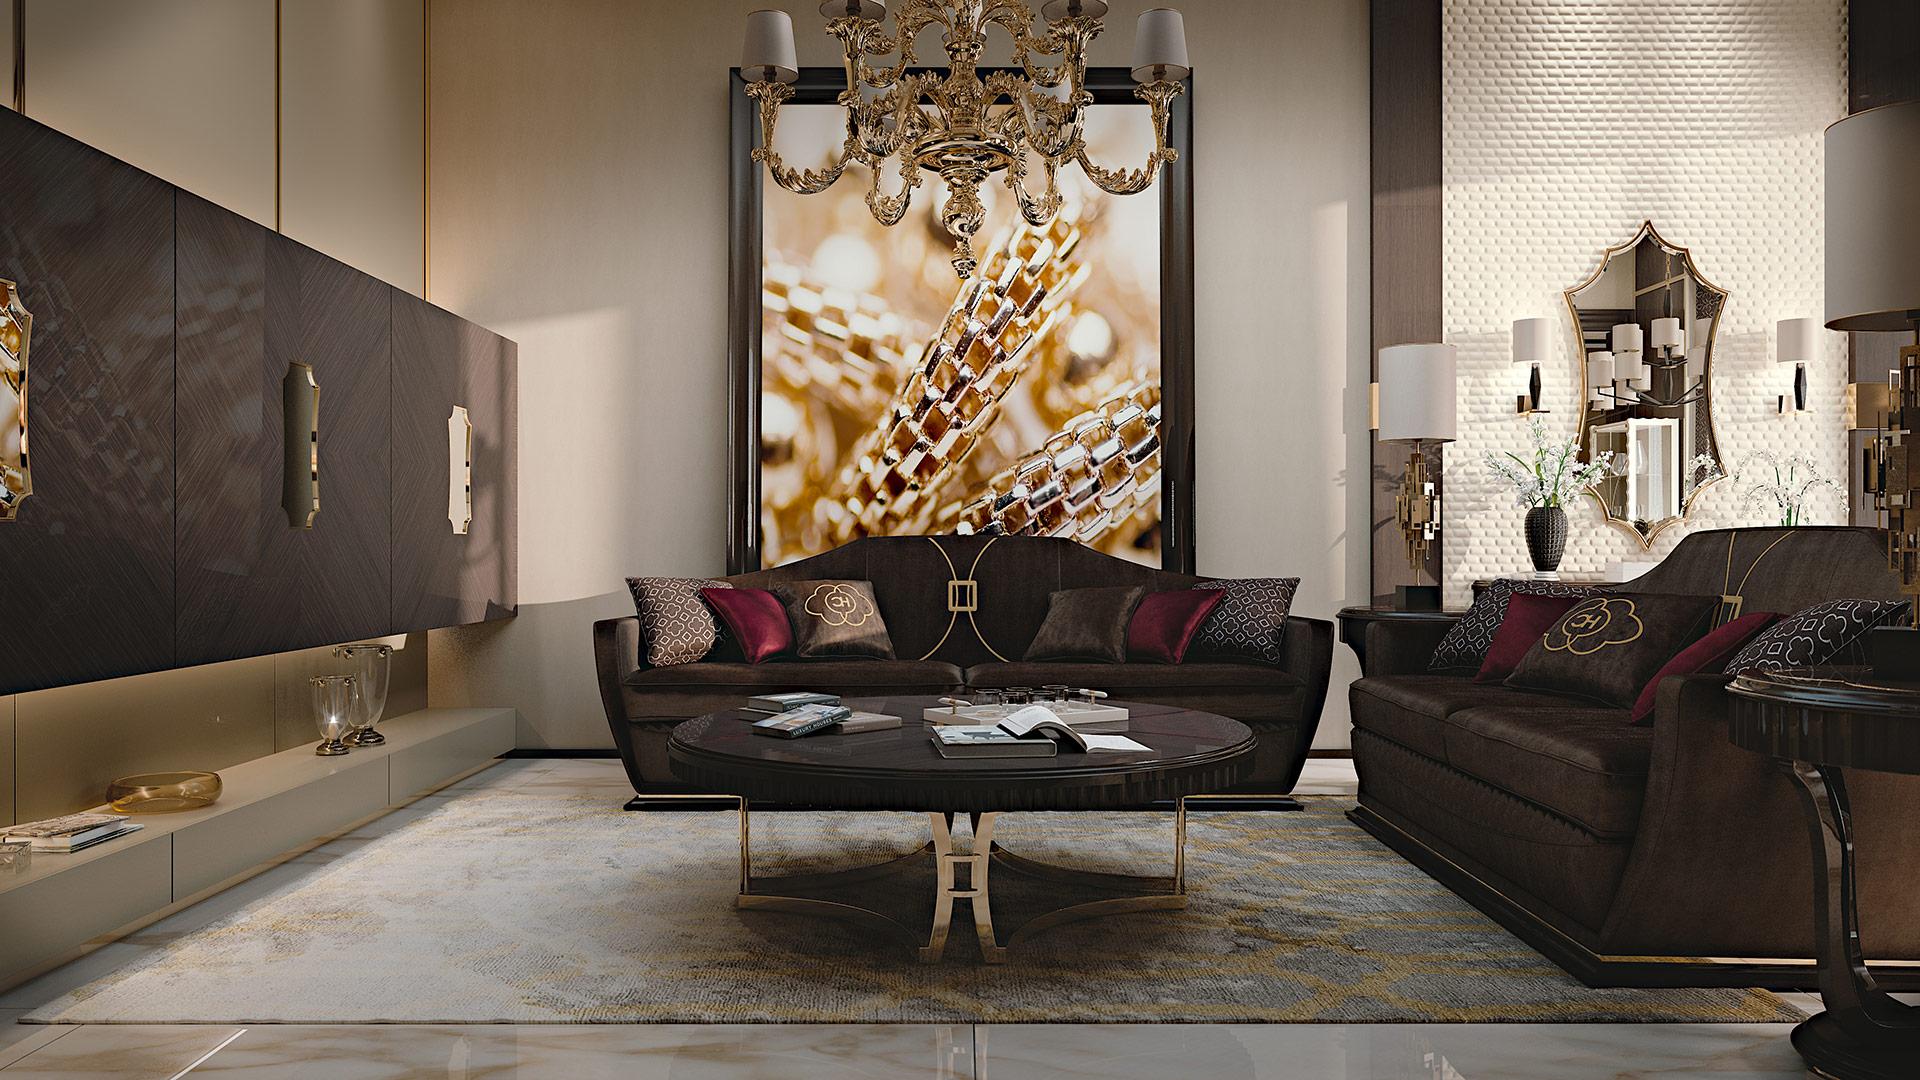 Beautiful carpet realized for the most luxurious and contemporary environment with its design that resembles the HOUSE OF ART collection motif created with the combination of arches and clovers in golden finish.
Other dimensions and colors also